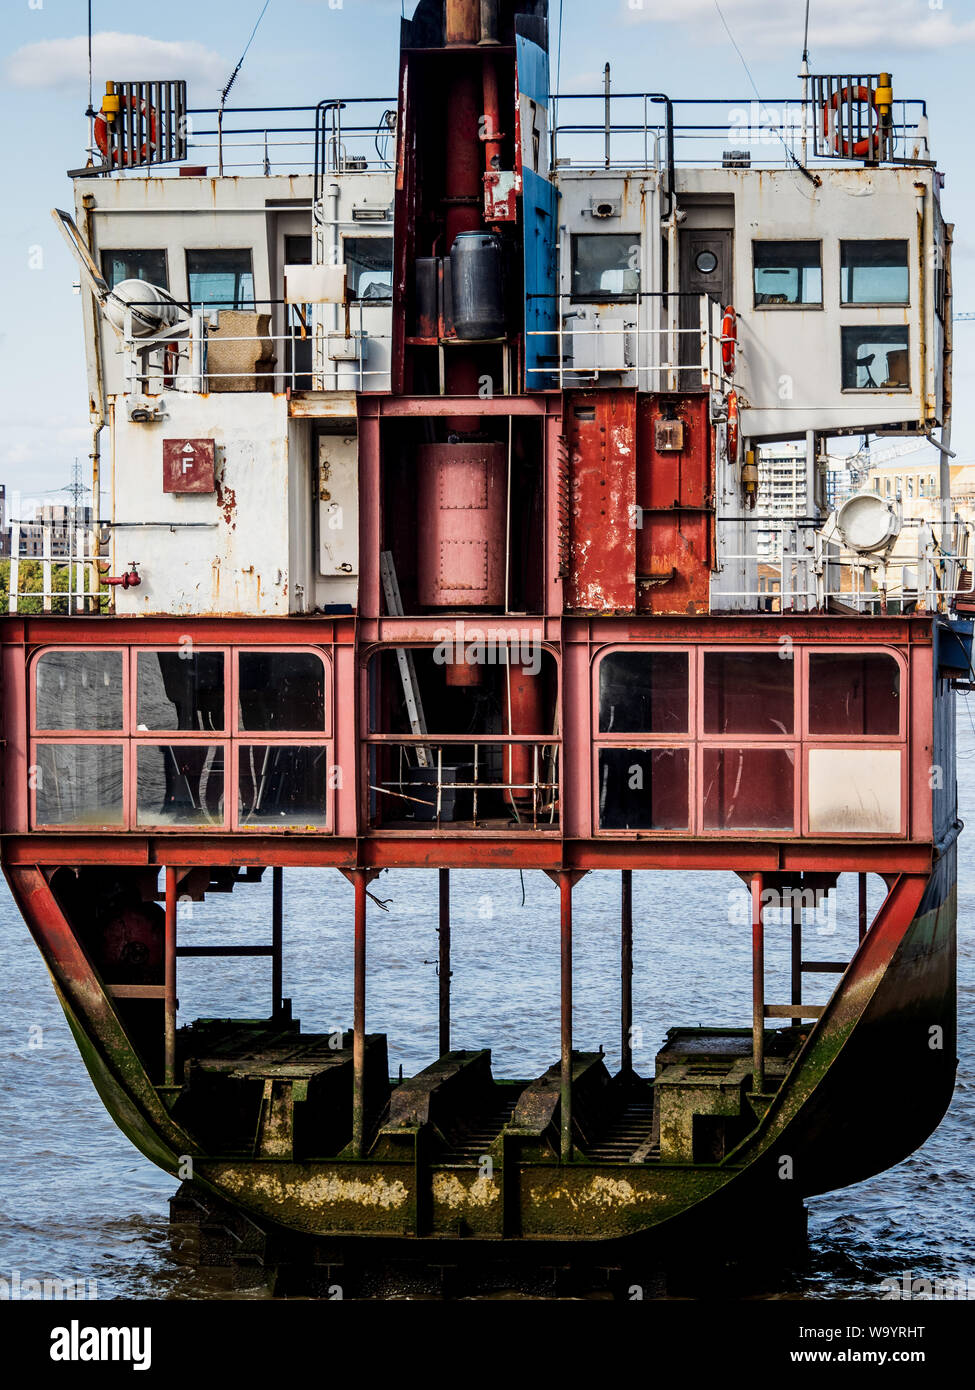 A Slice of Reality ship sculpture by Richard Wilson. Sliced vertical section through the former 800 ton dredger Arco Trent near the O2 Arena London. Stock Photo